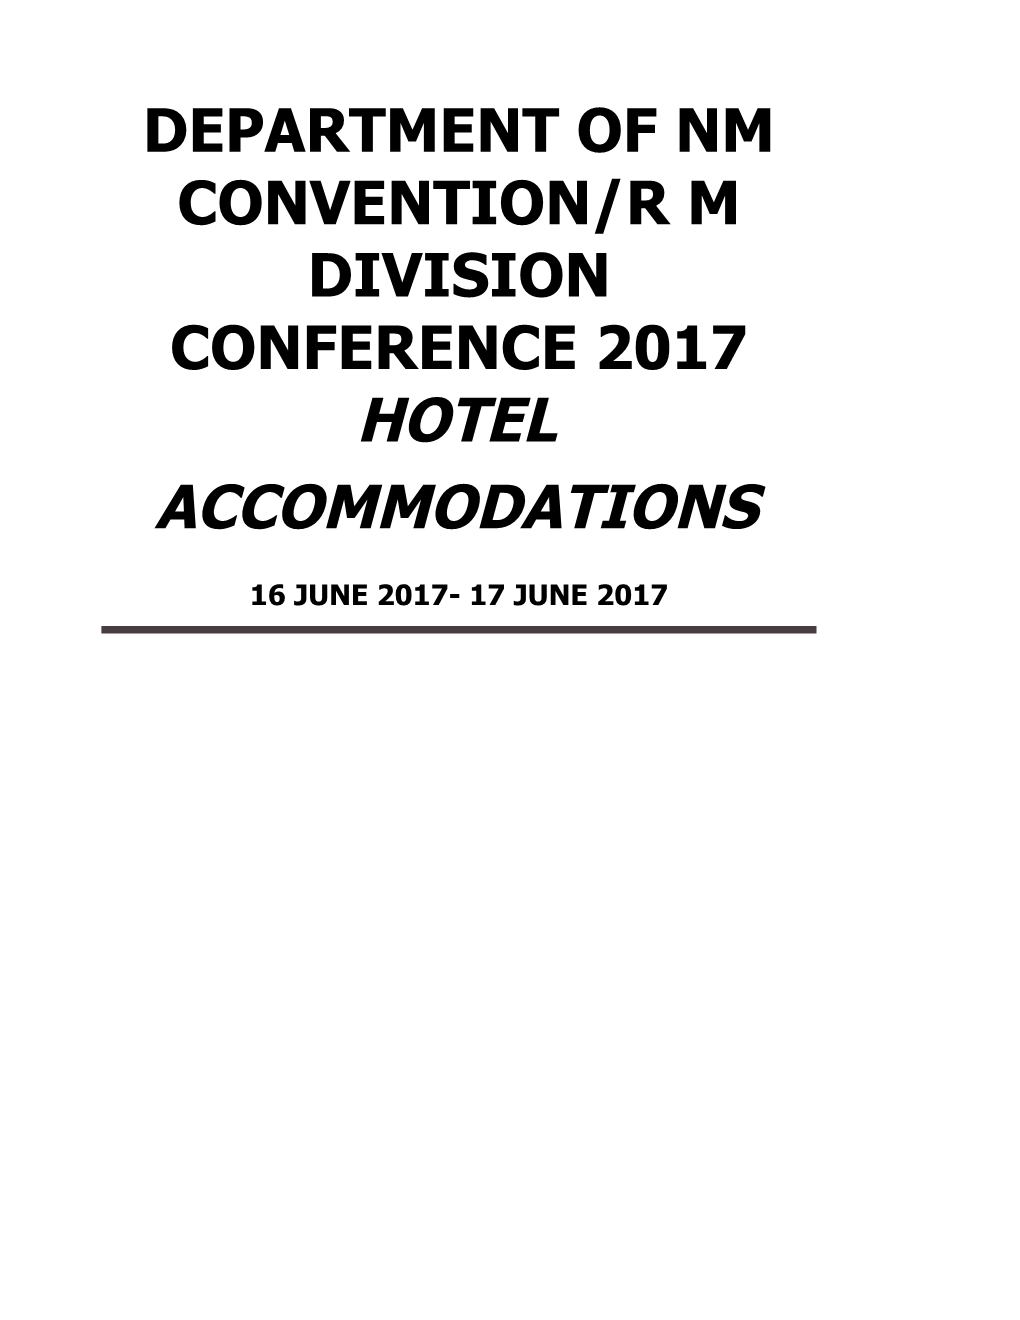 Department of Nm Convention/R M Division Conference 2017